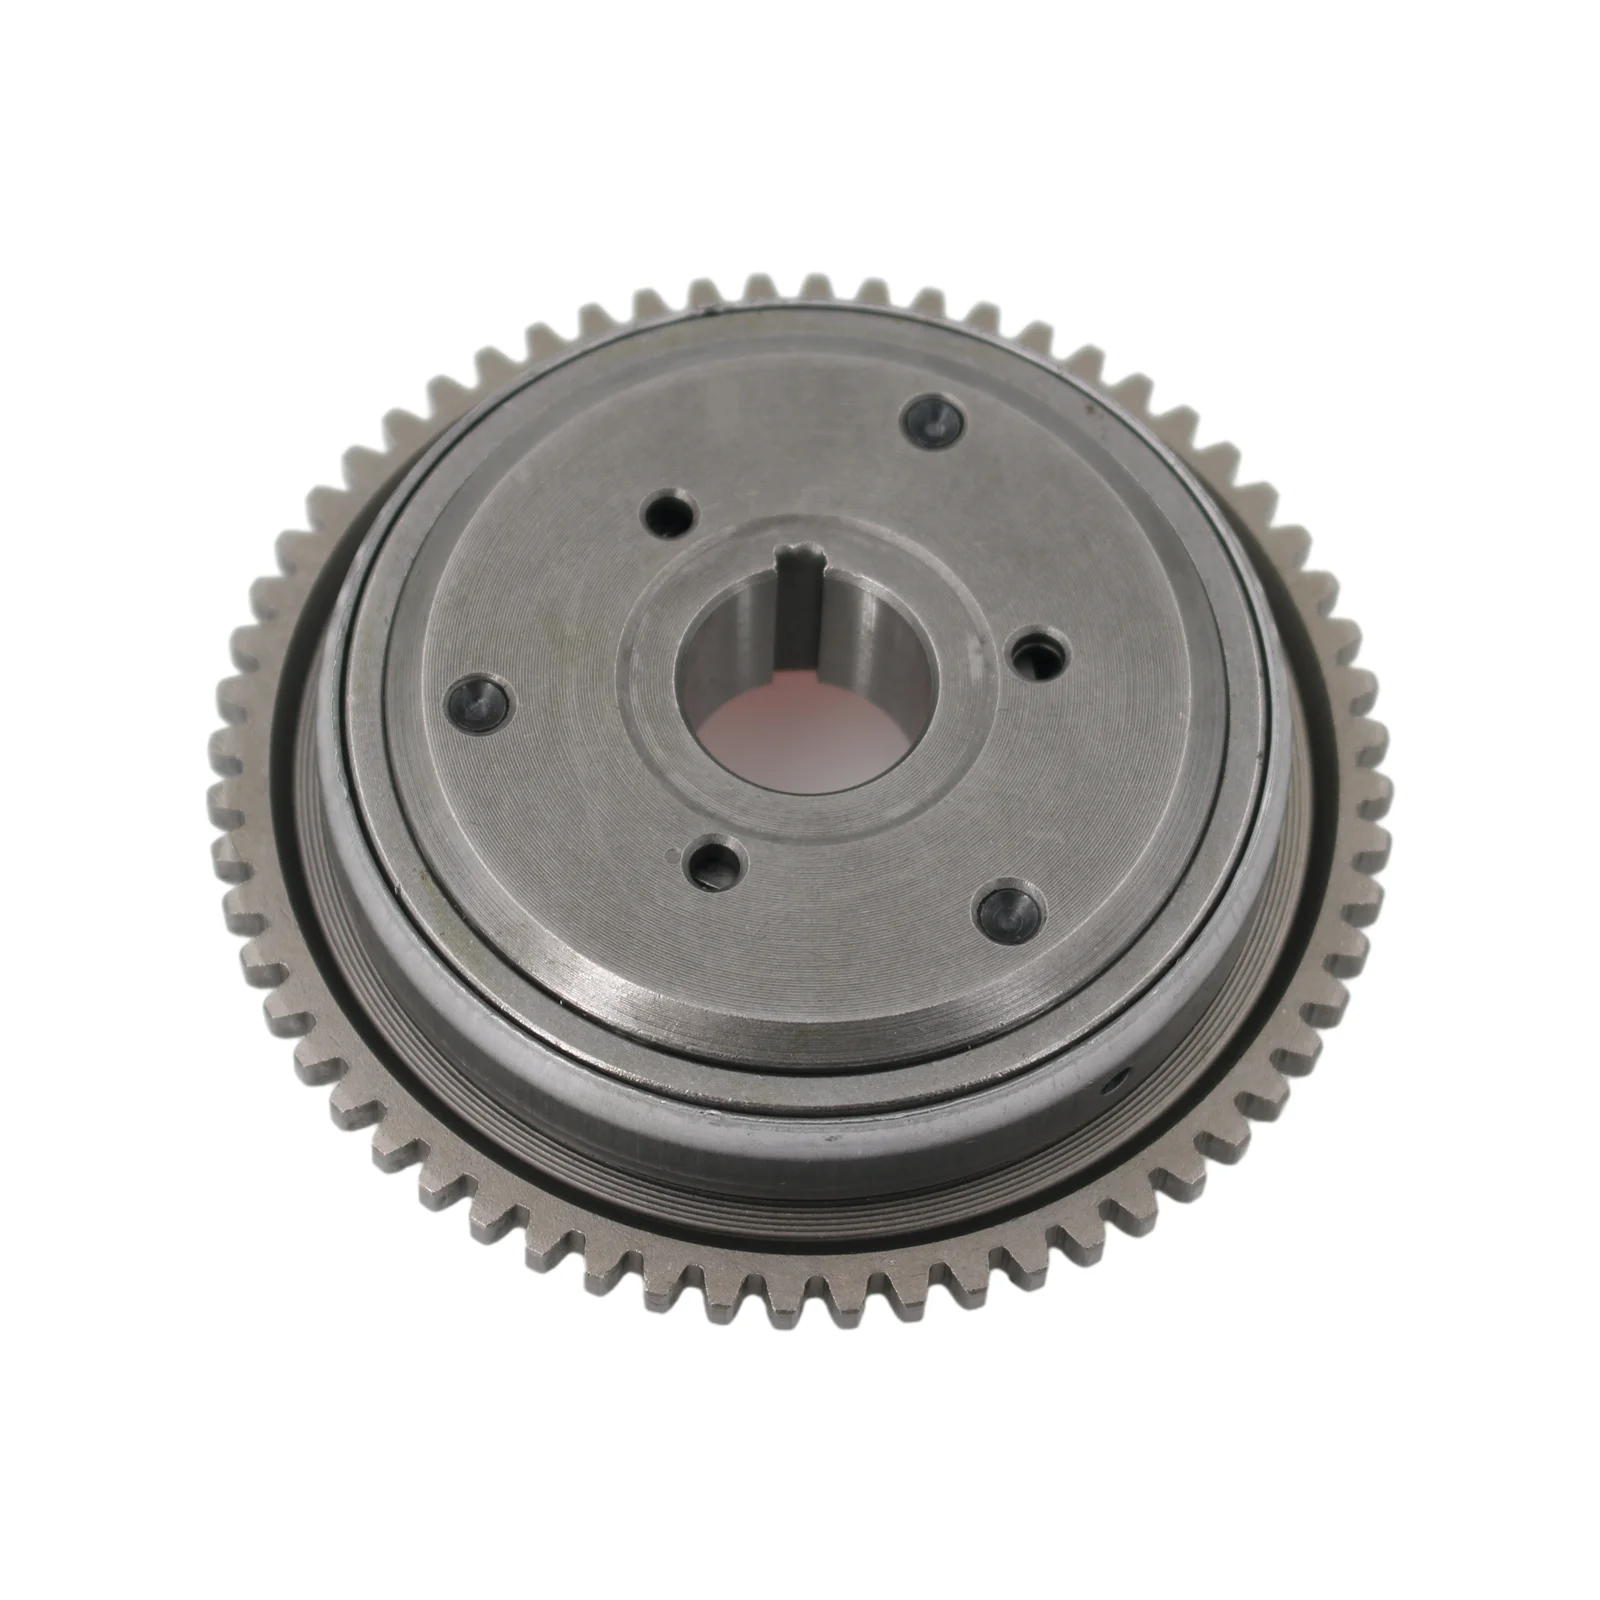 

WILEBO One Way Starter Clutch Gear Assembly for Scooter Moped 4 Stroke GY6 125cc 150cc 152QMI 157QMJ ATV Go-Kart Scooter